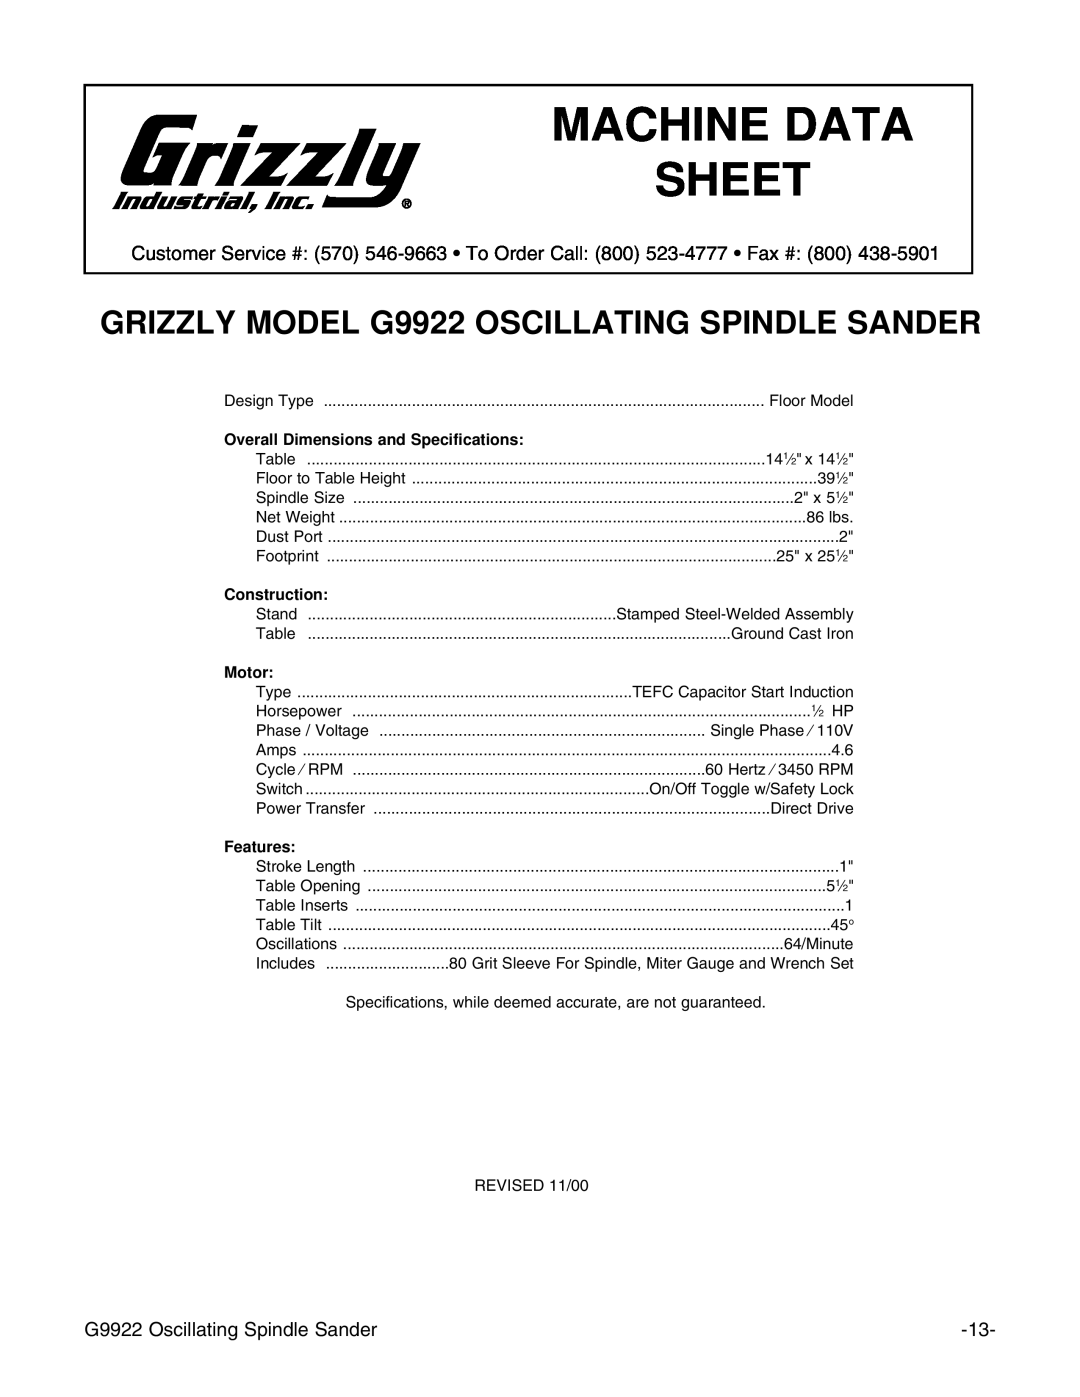 Grizzly GRIZZLY MODEL G9922 OSCILLATING SPINDLE SANDER, Machine Data Sheet, Overall Dimensions and Specifications 